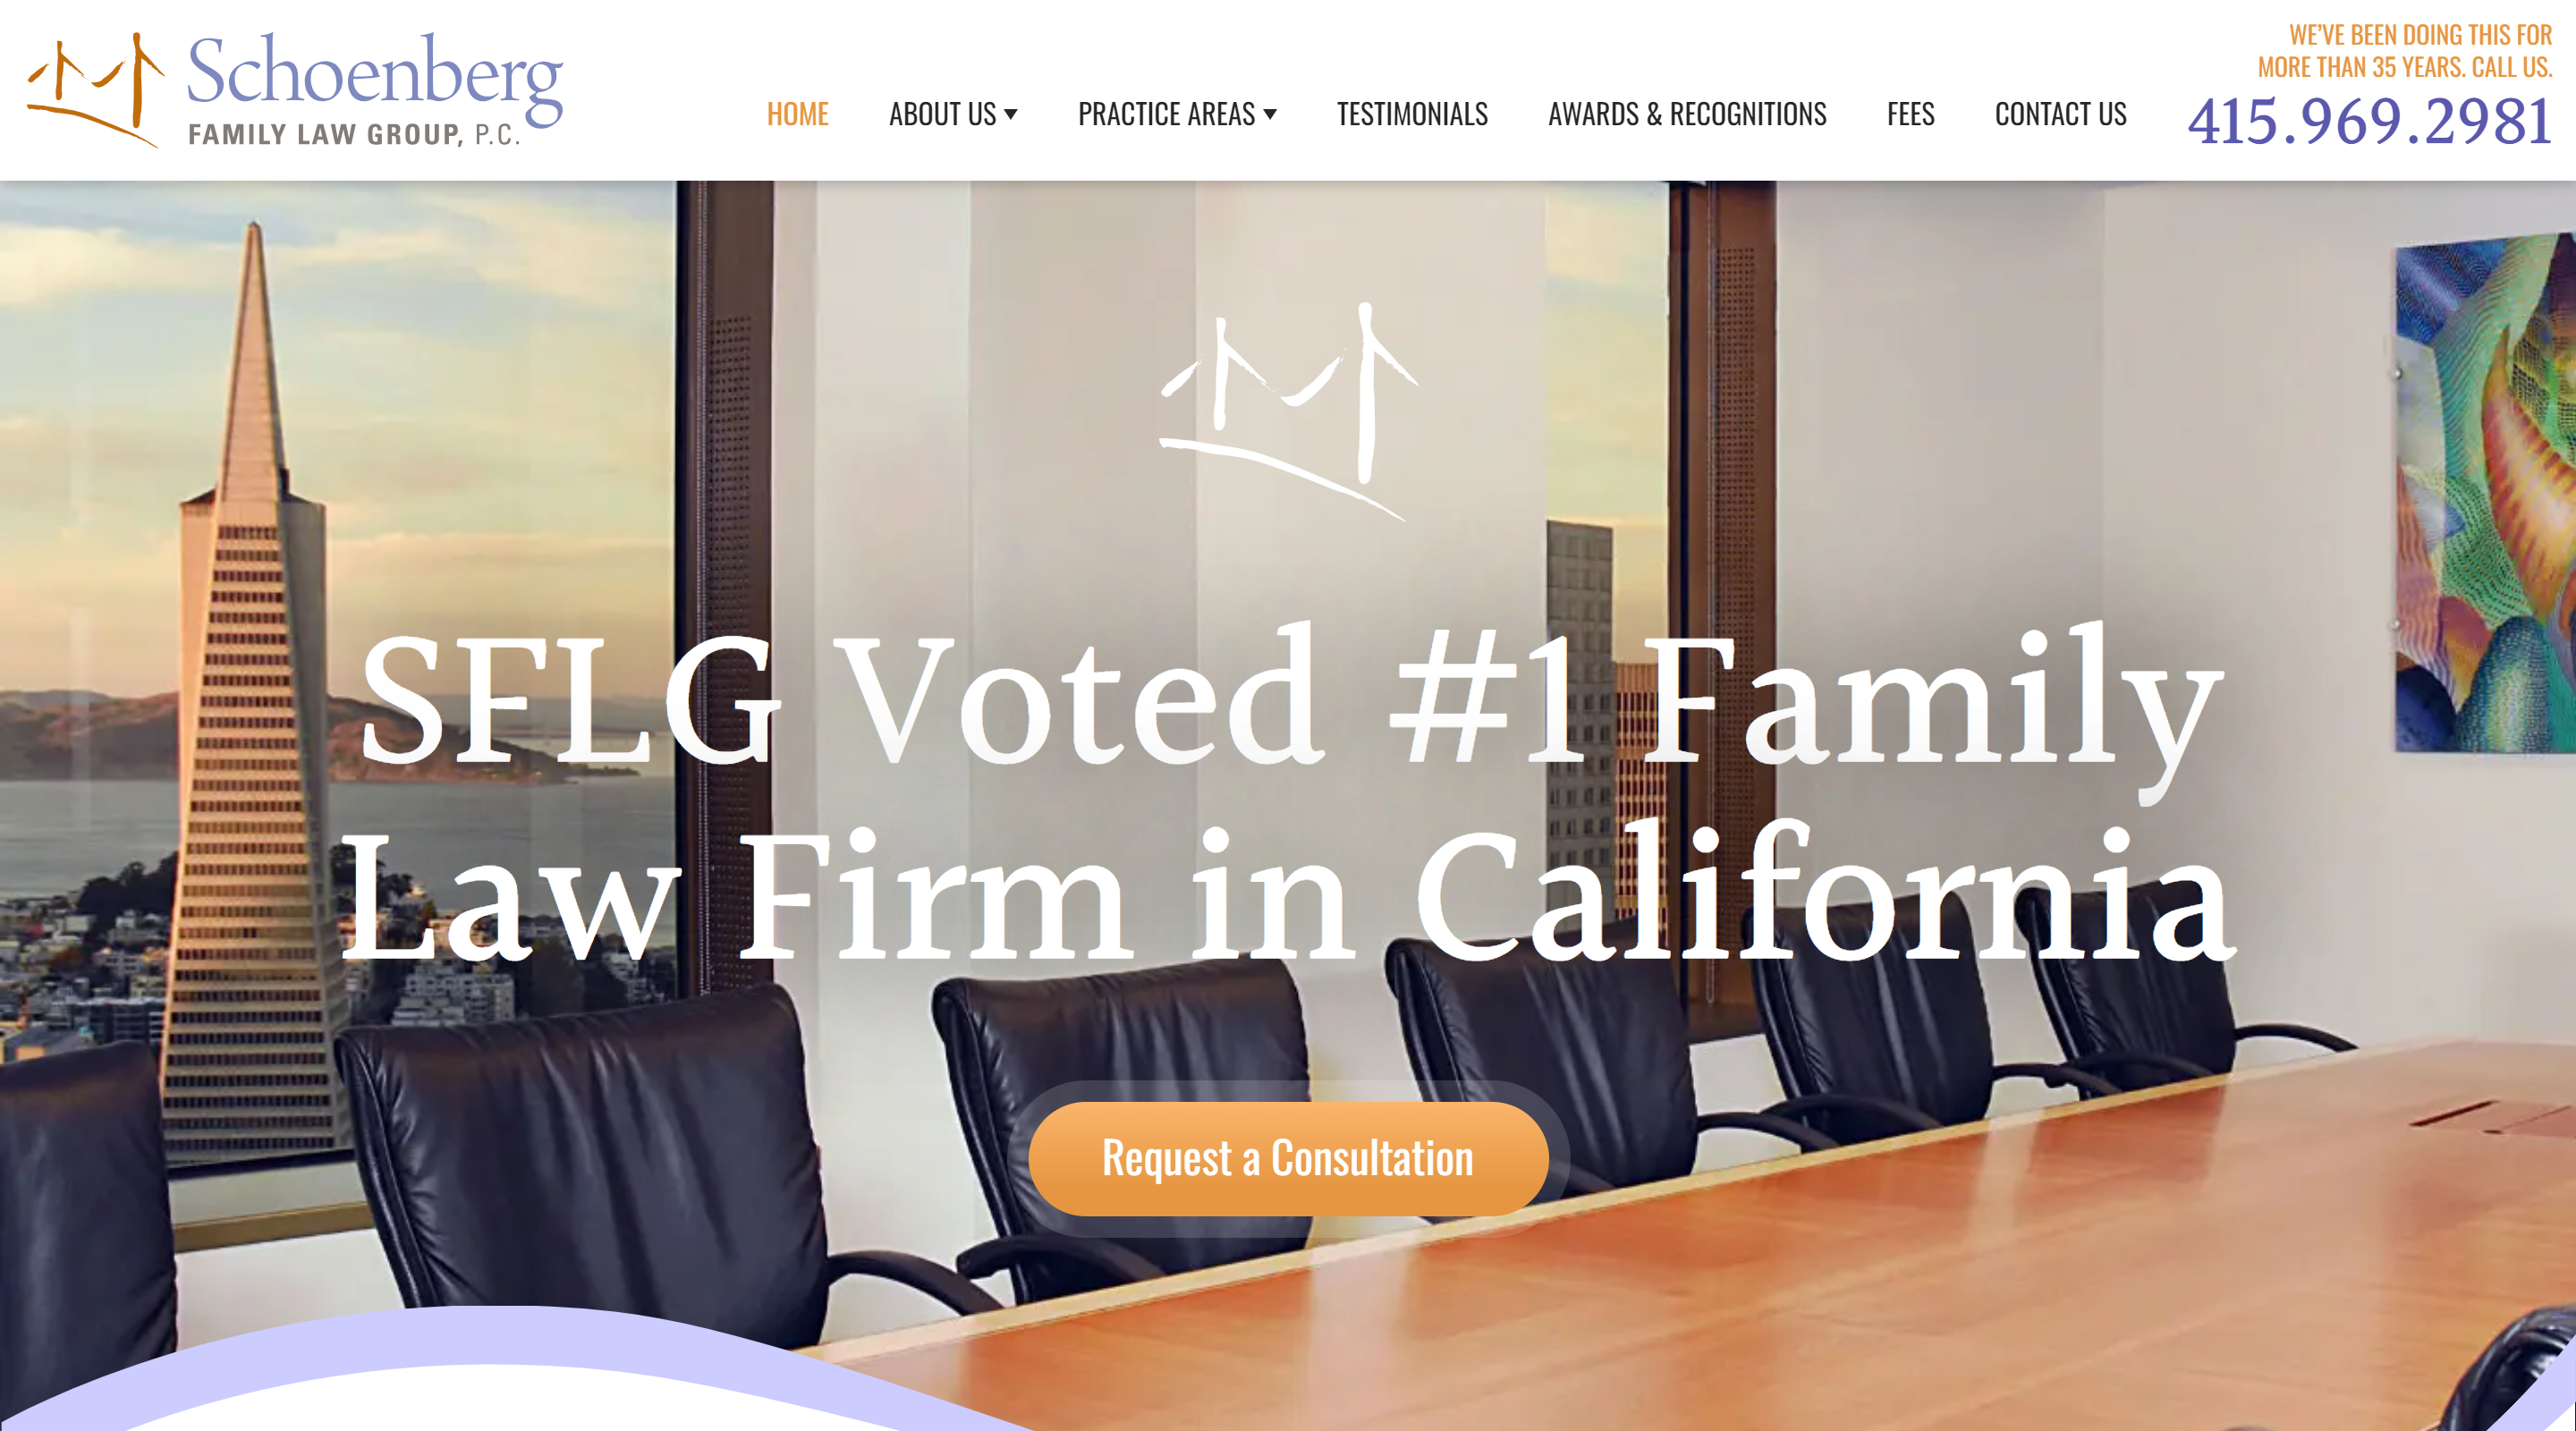 Schoenberg Family Law Group law firm website